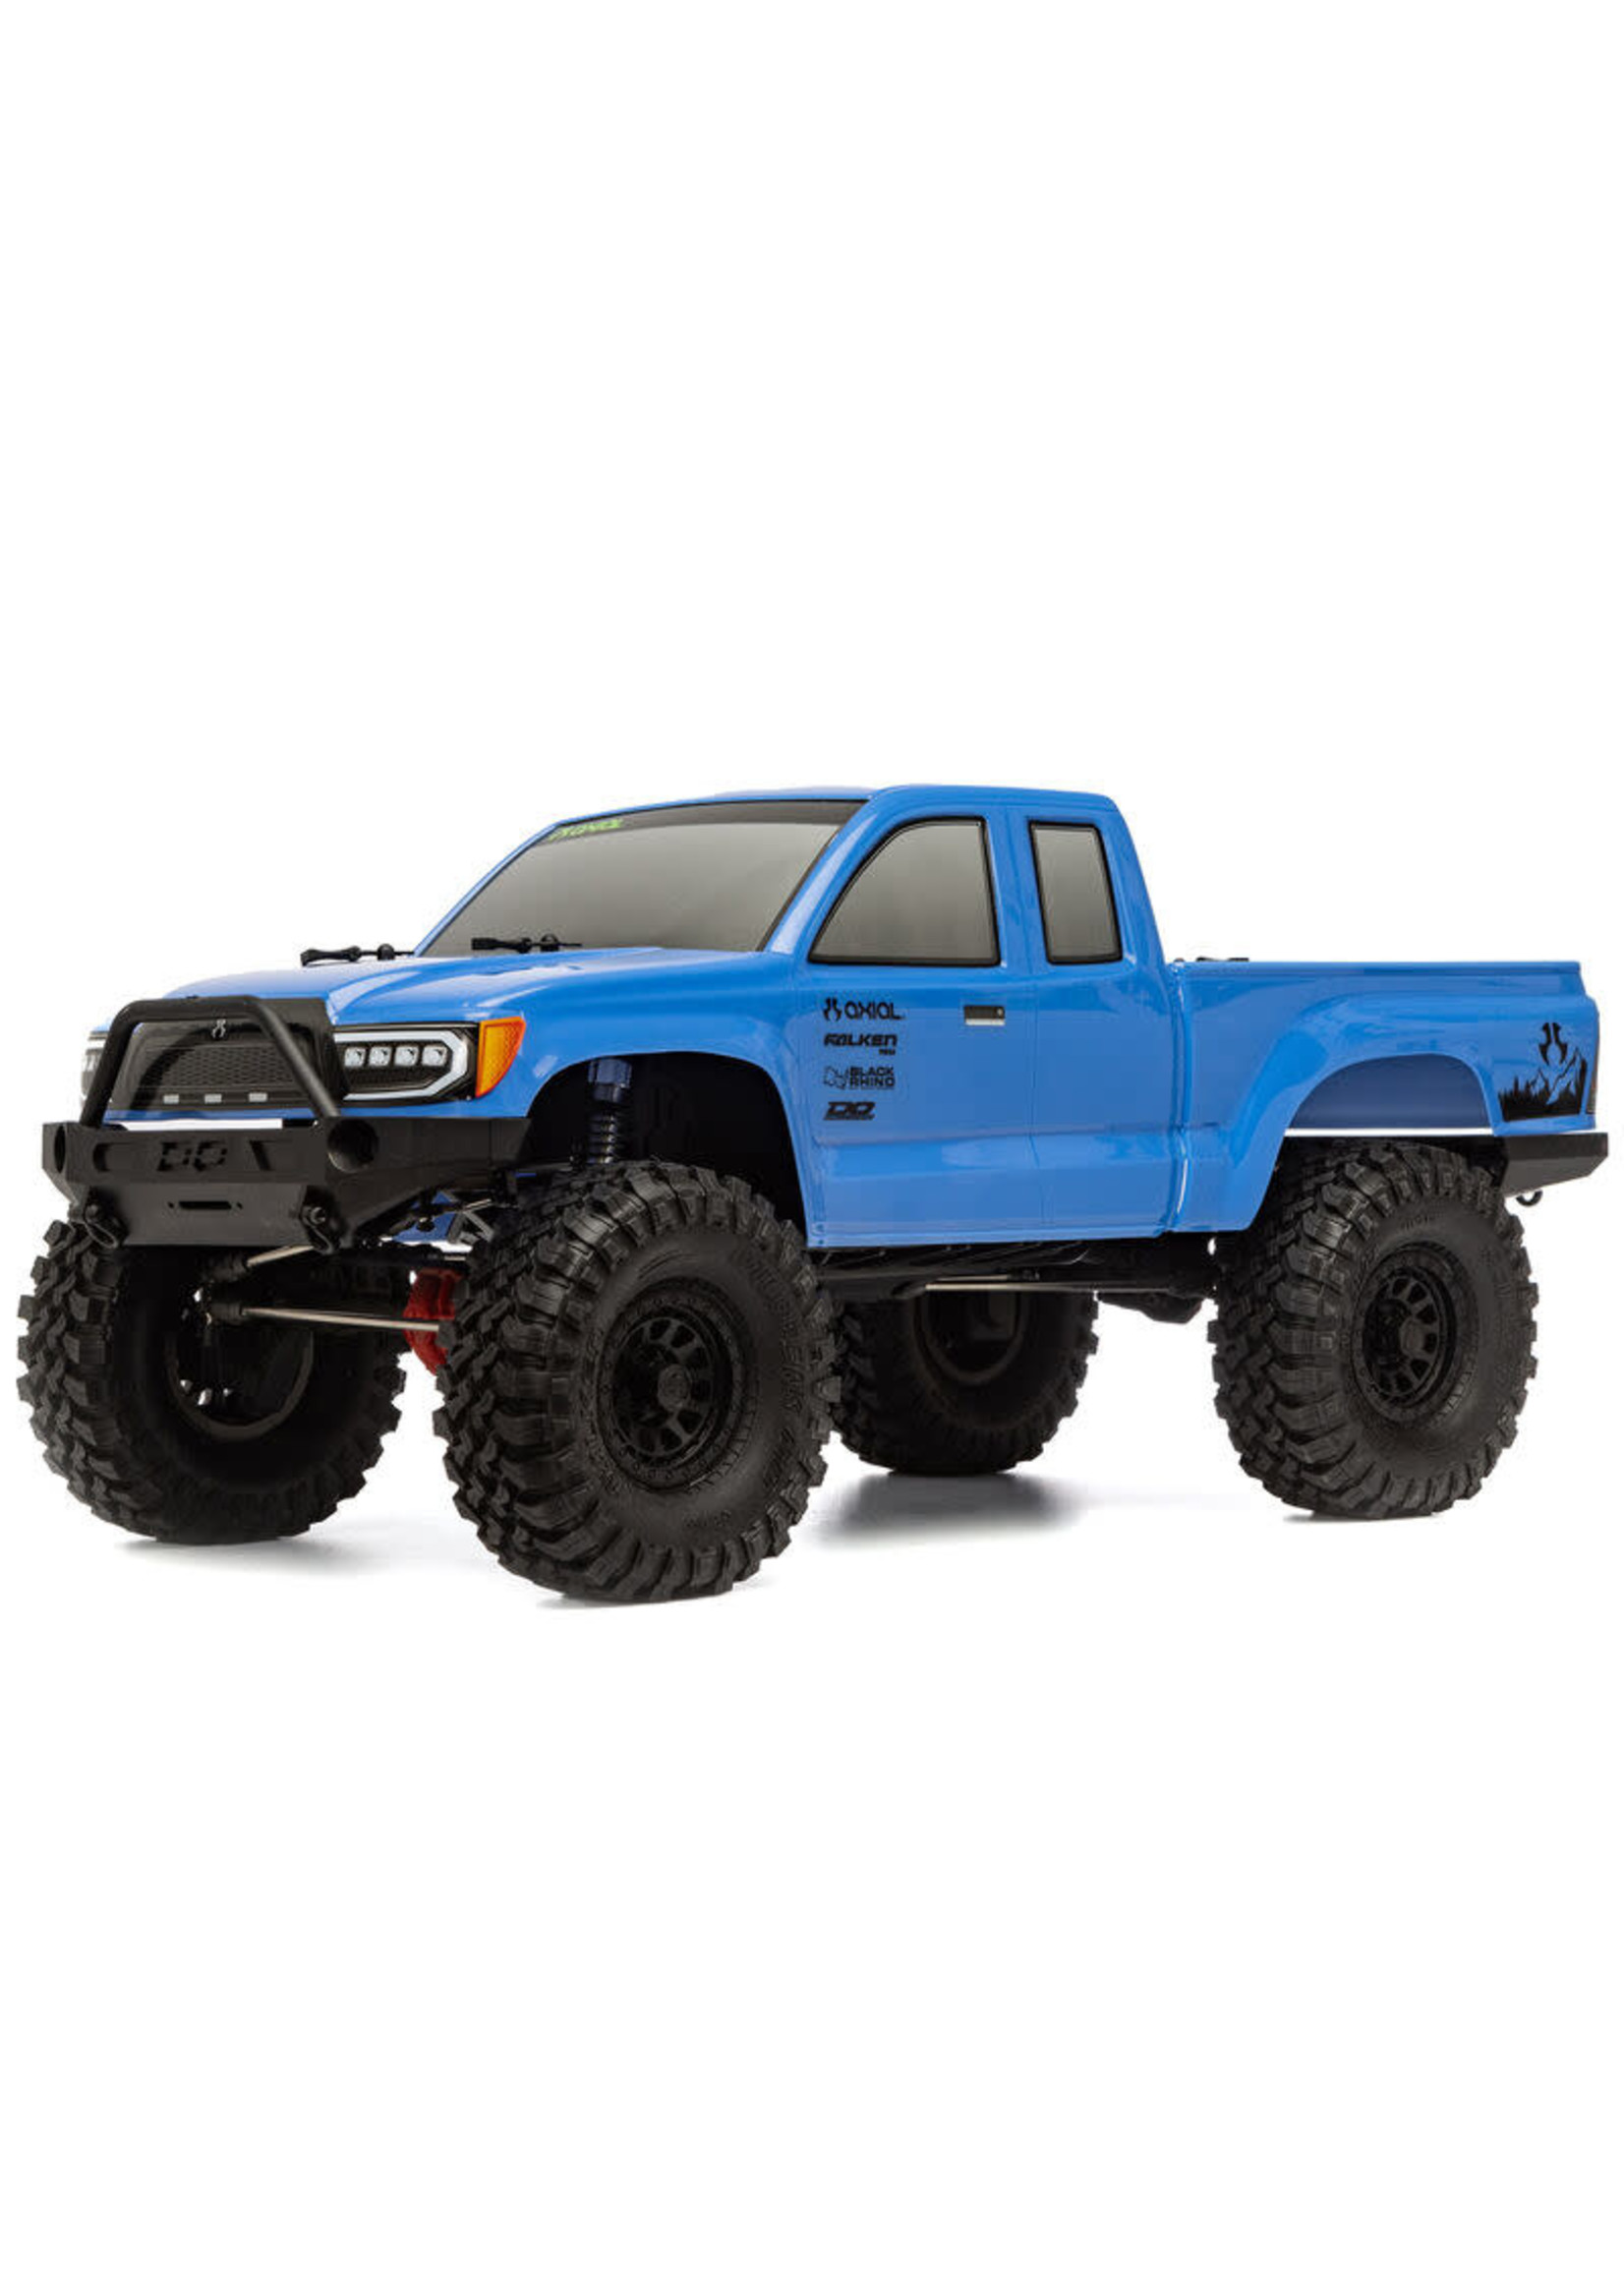 Axial AXI03027 Axial SCX10 III Base Camp 1/10th 4WD RTR